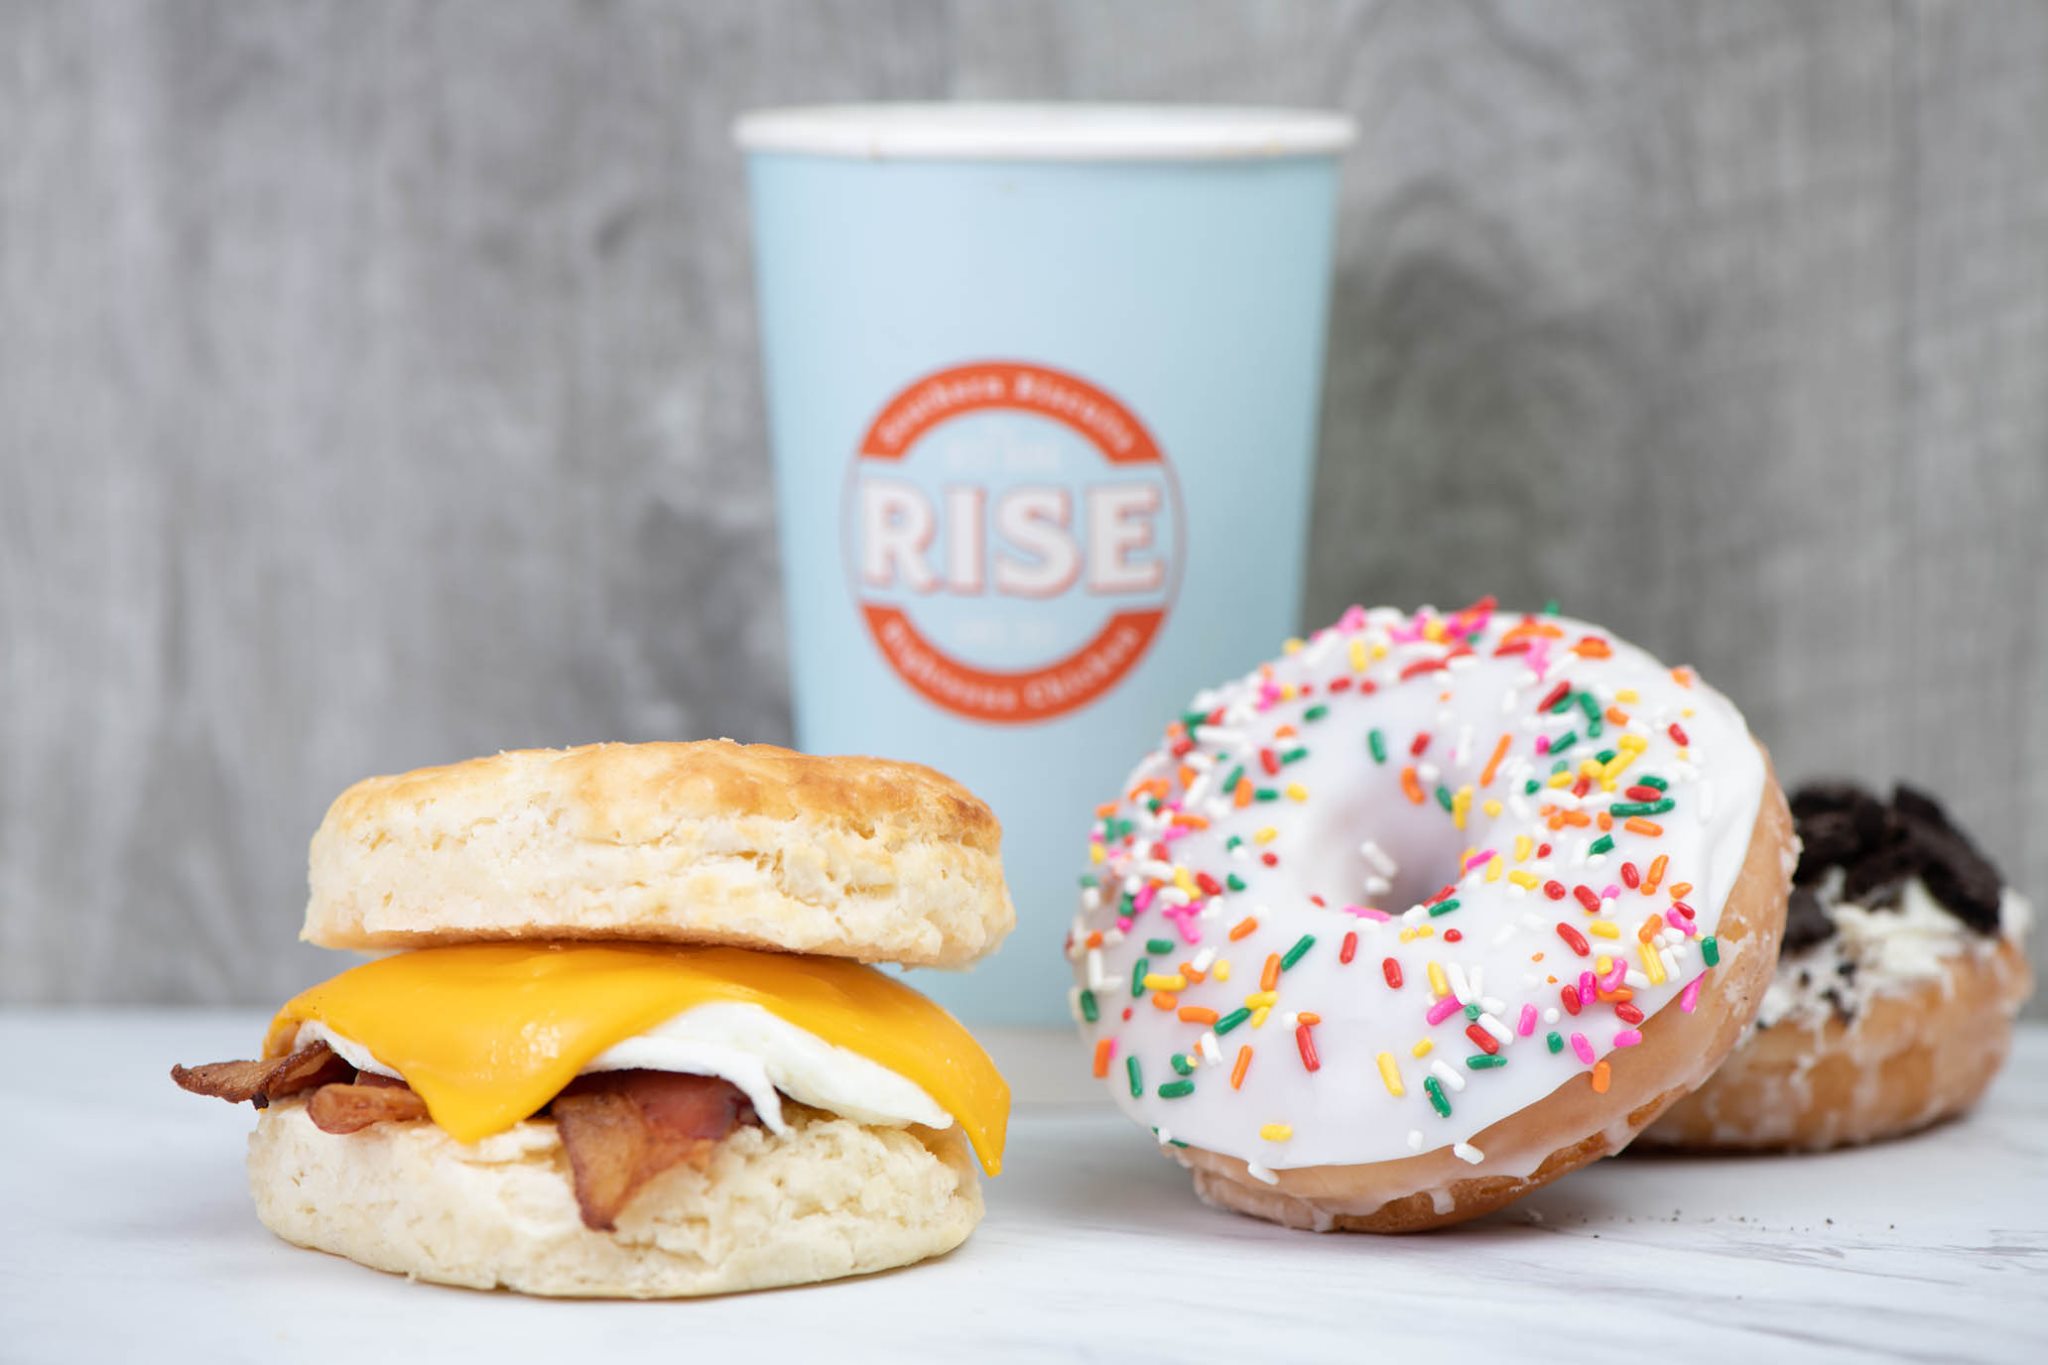 Rise Southern Biscuits breakfast franchise sandwich, coffee and donut.